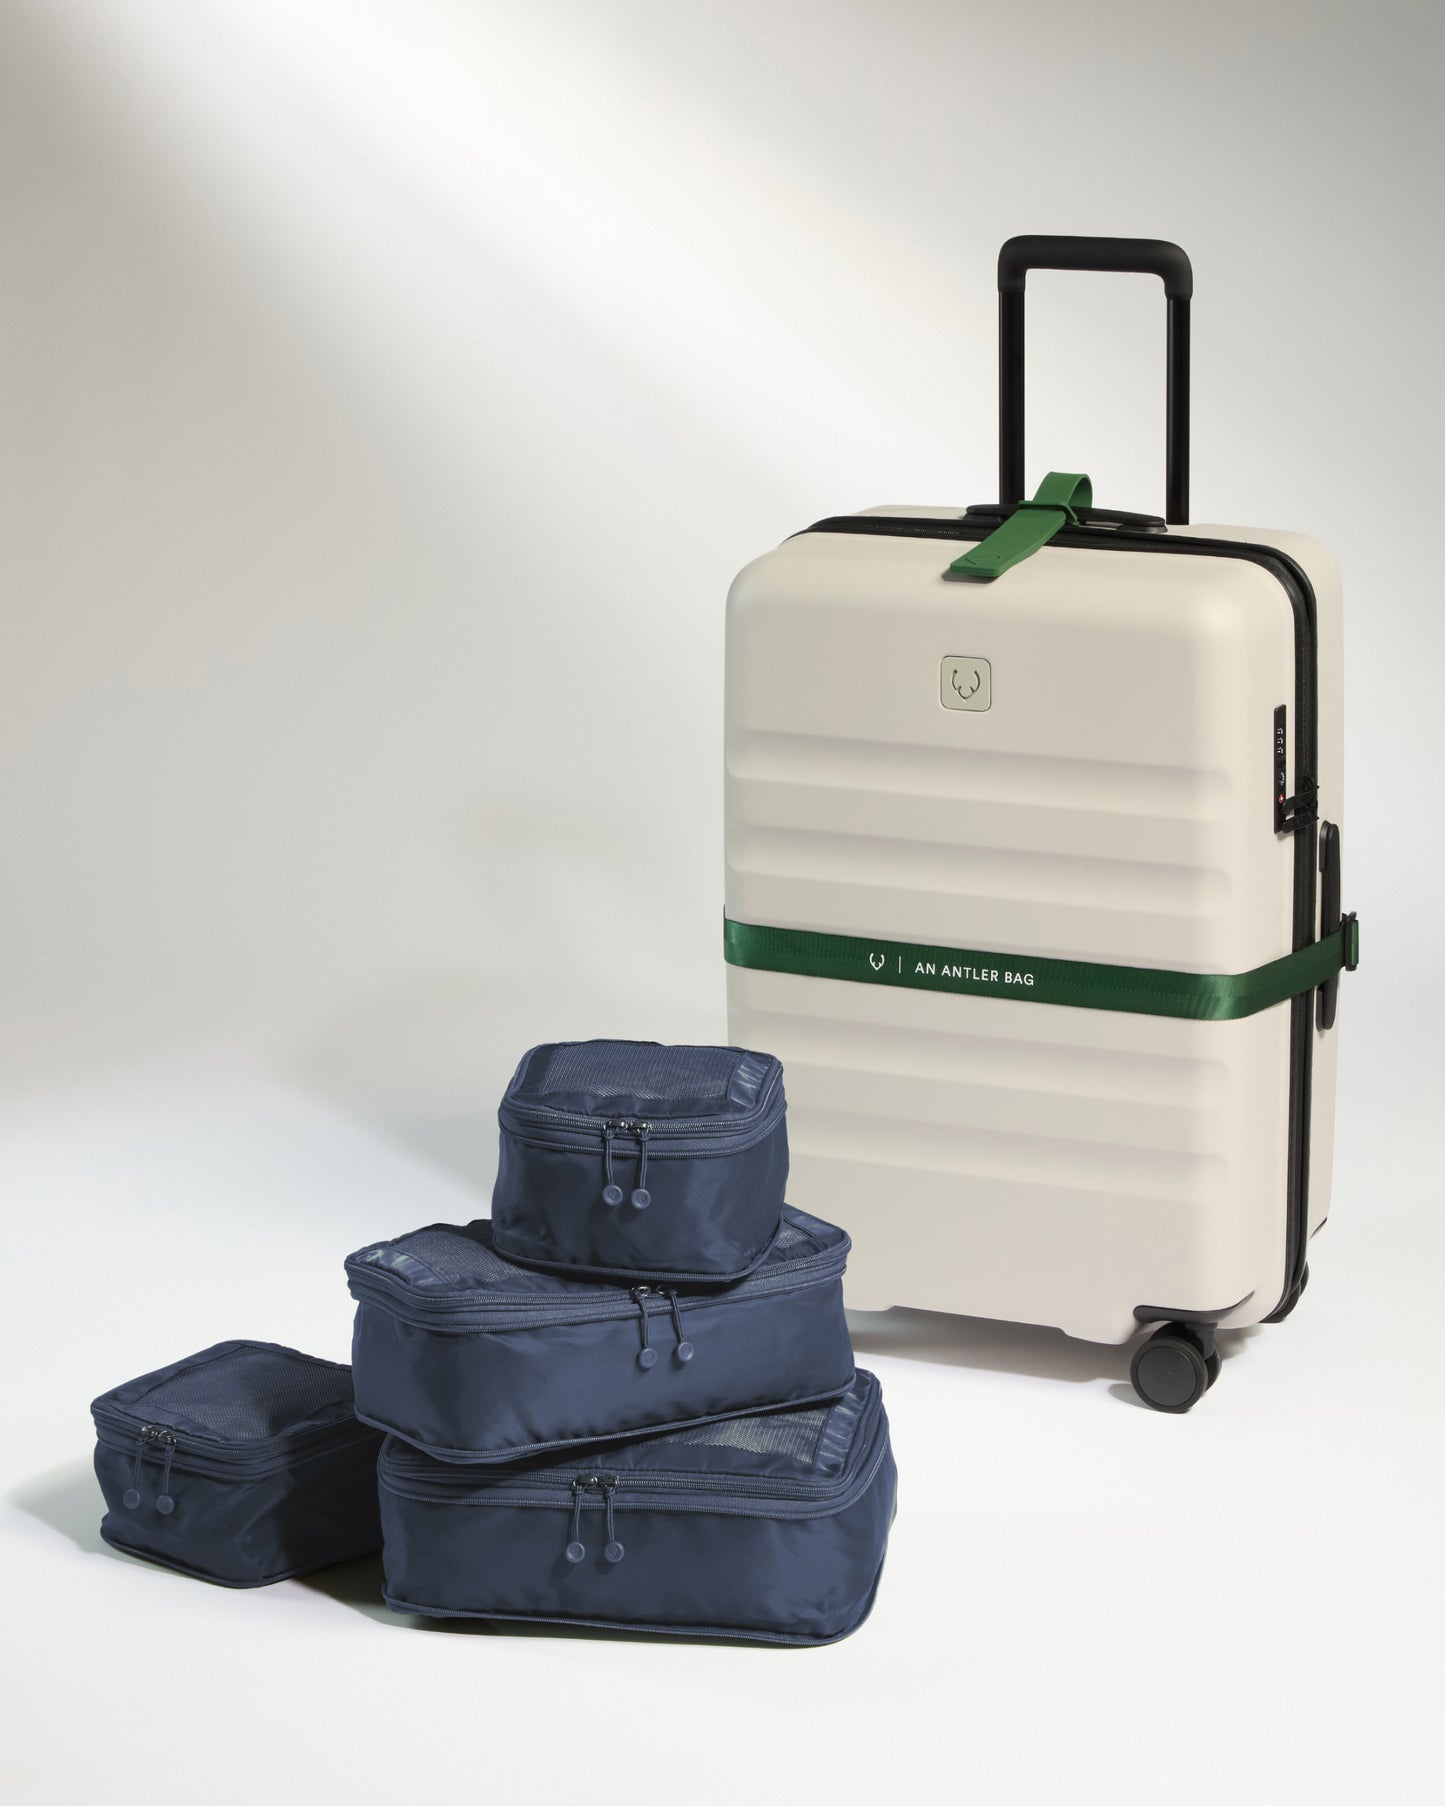 Chelsea 4 packing cubes in navy